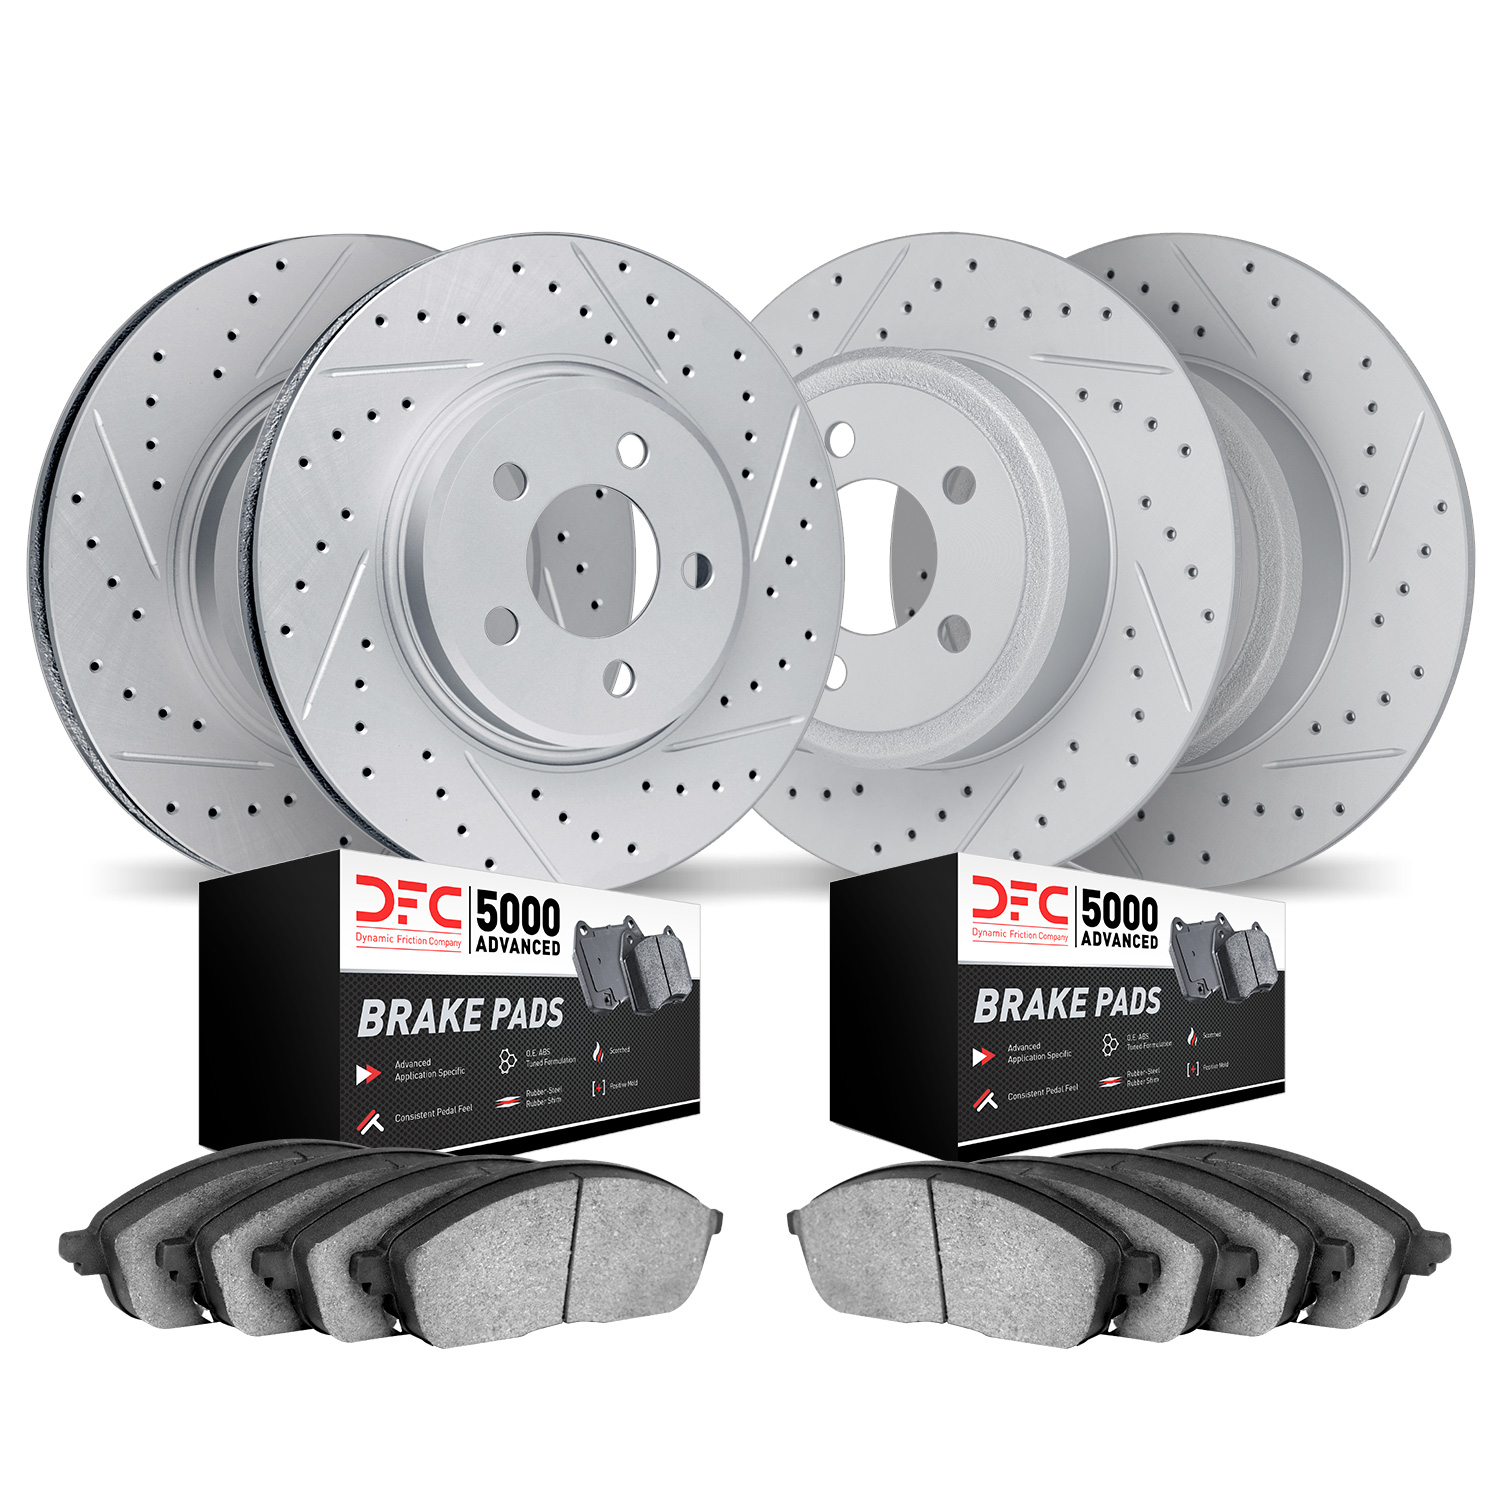 2504-13012 Geoperformance Drilled/Slotted Rotors w/5000 Advanced Brake Pads Kit, Fits Select Subaru, Position: Front and Rear